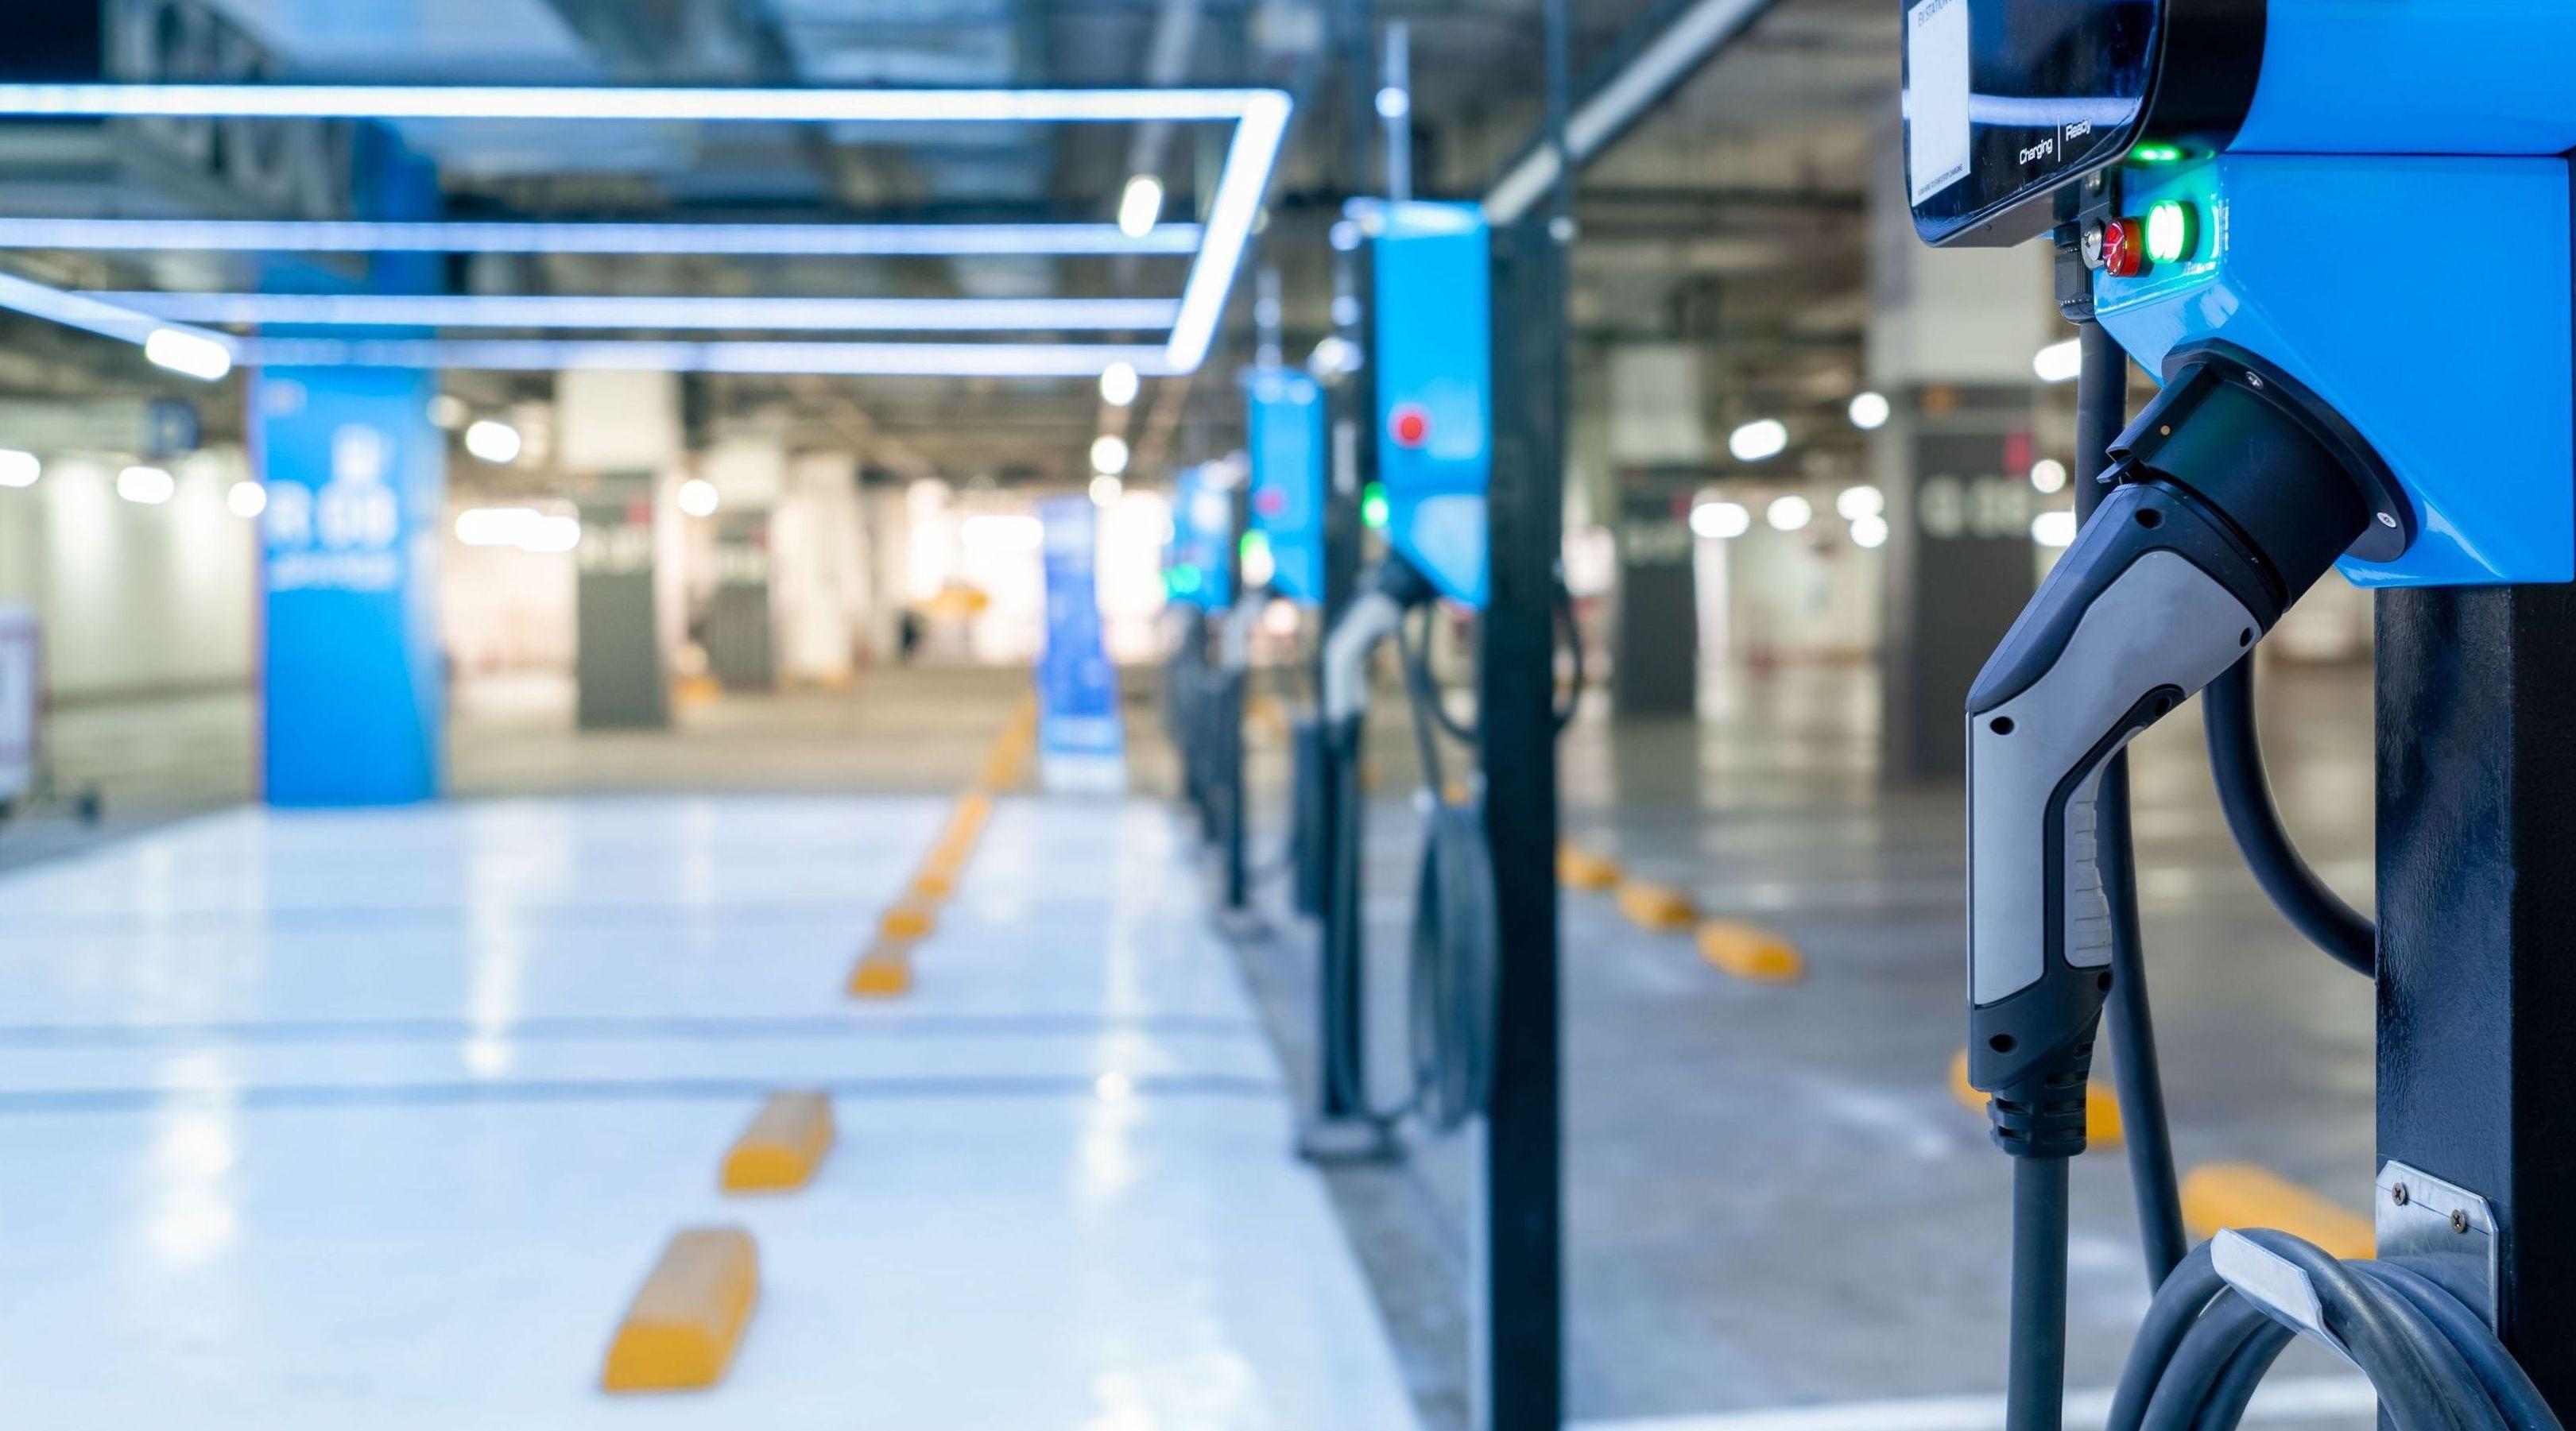 Charging stations in underground parking